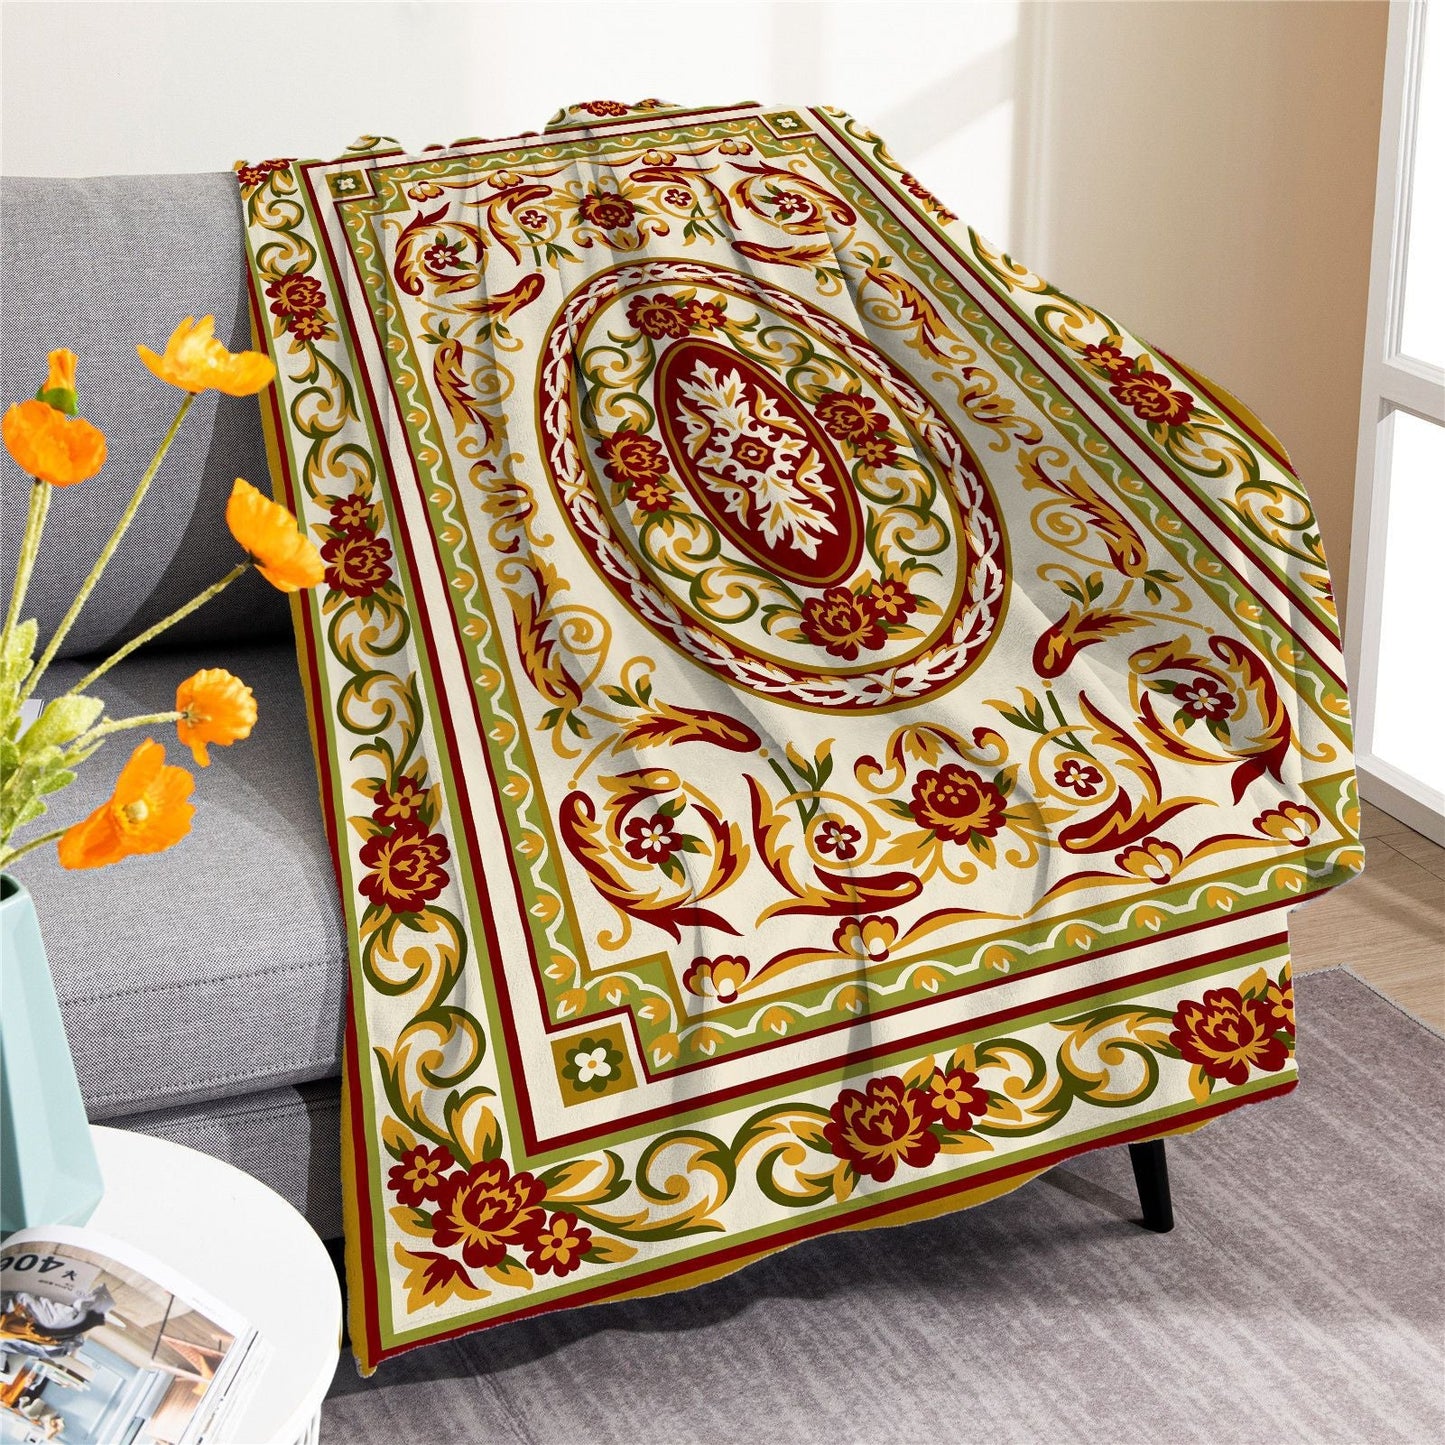 Vintage Boho Fleece Throw Blankets-Blankets-M20220701-5-50*60 Inches-Free Shipping at meselling99